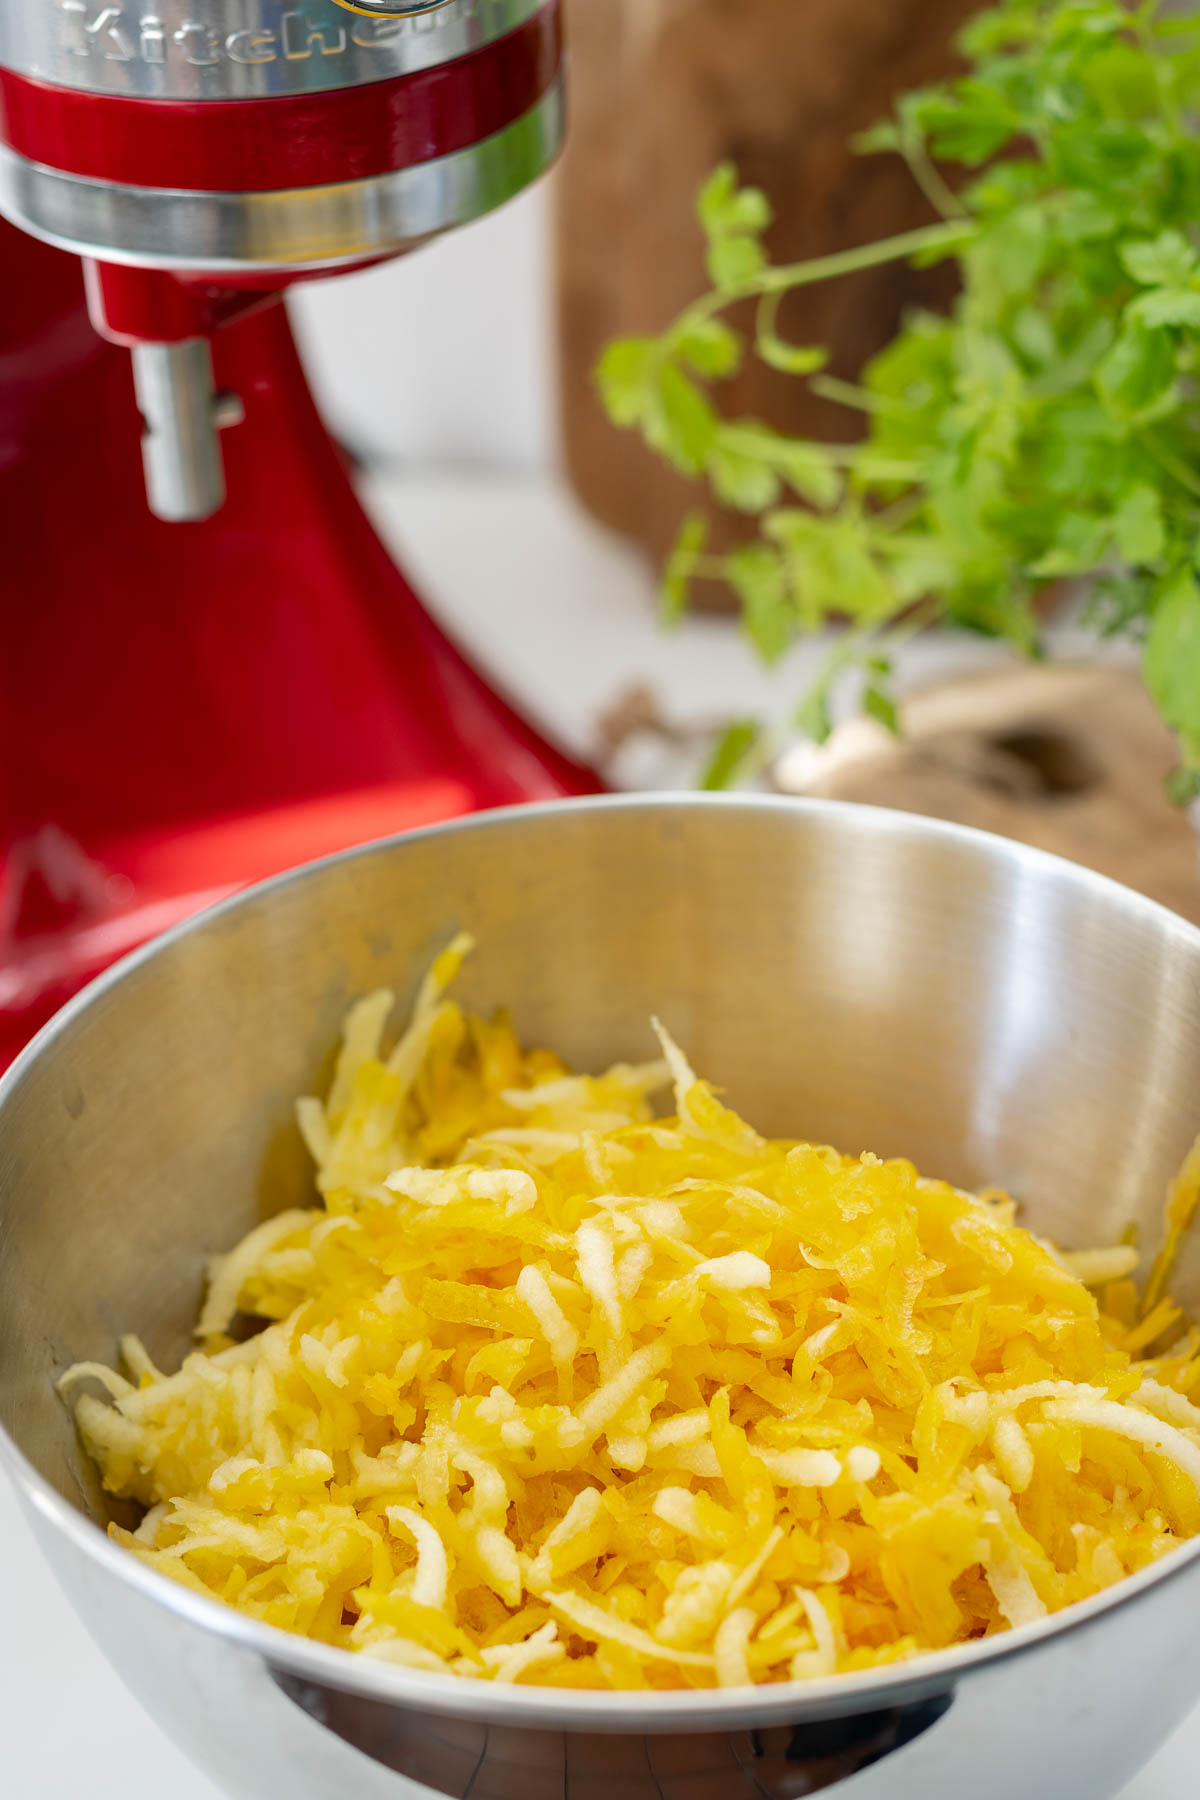 Grated carrots, apple and golden beetroot for Carrot Apple Salad with Yoghurt Dressing